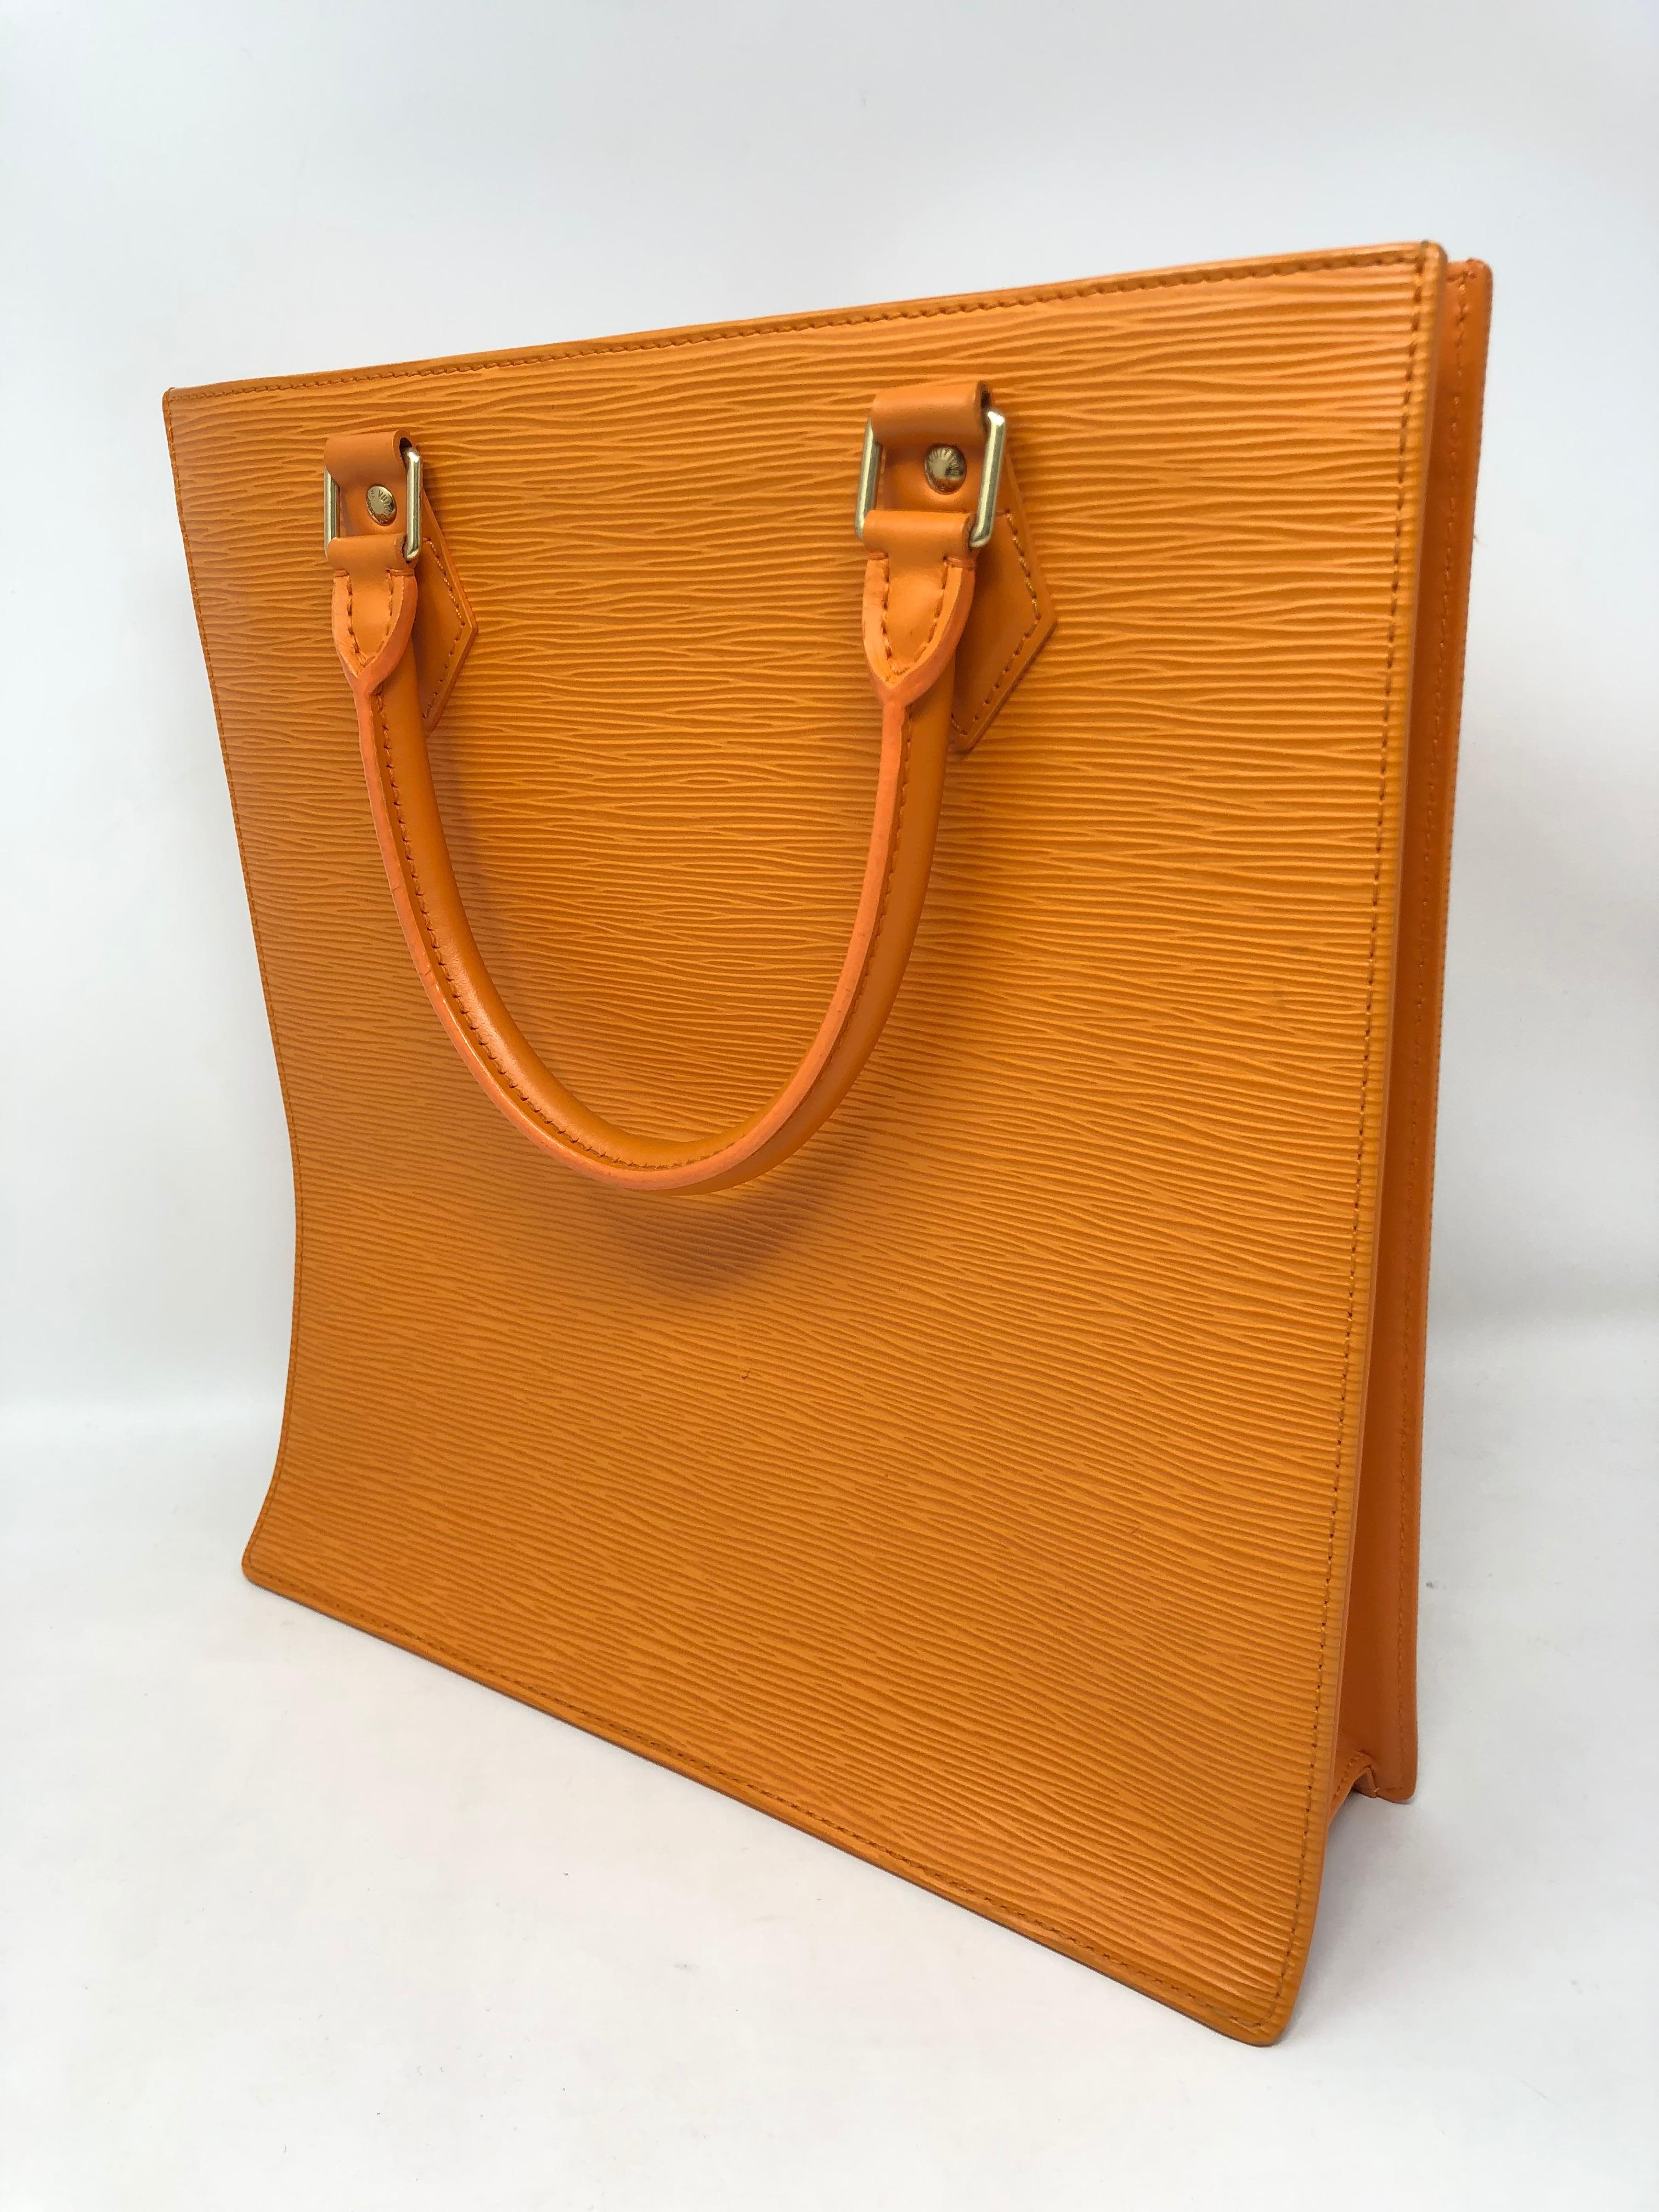 Louis Vuitton Orange Sac Plat in Epi leather. Retired Sac Plat is one of our favorite totes. Larger documents and smaller laptop can be carried inside. Beautiful orange epi leather and orange fabric interior. Like new condition. Initials are hot